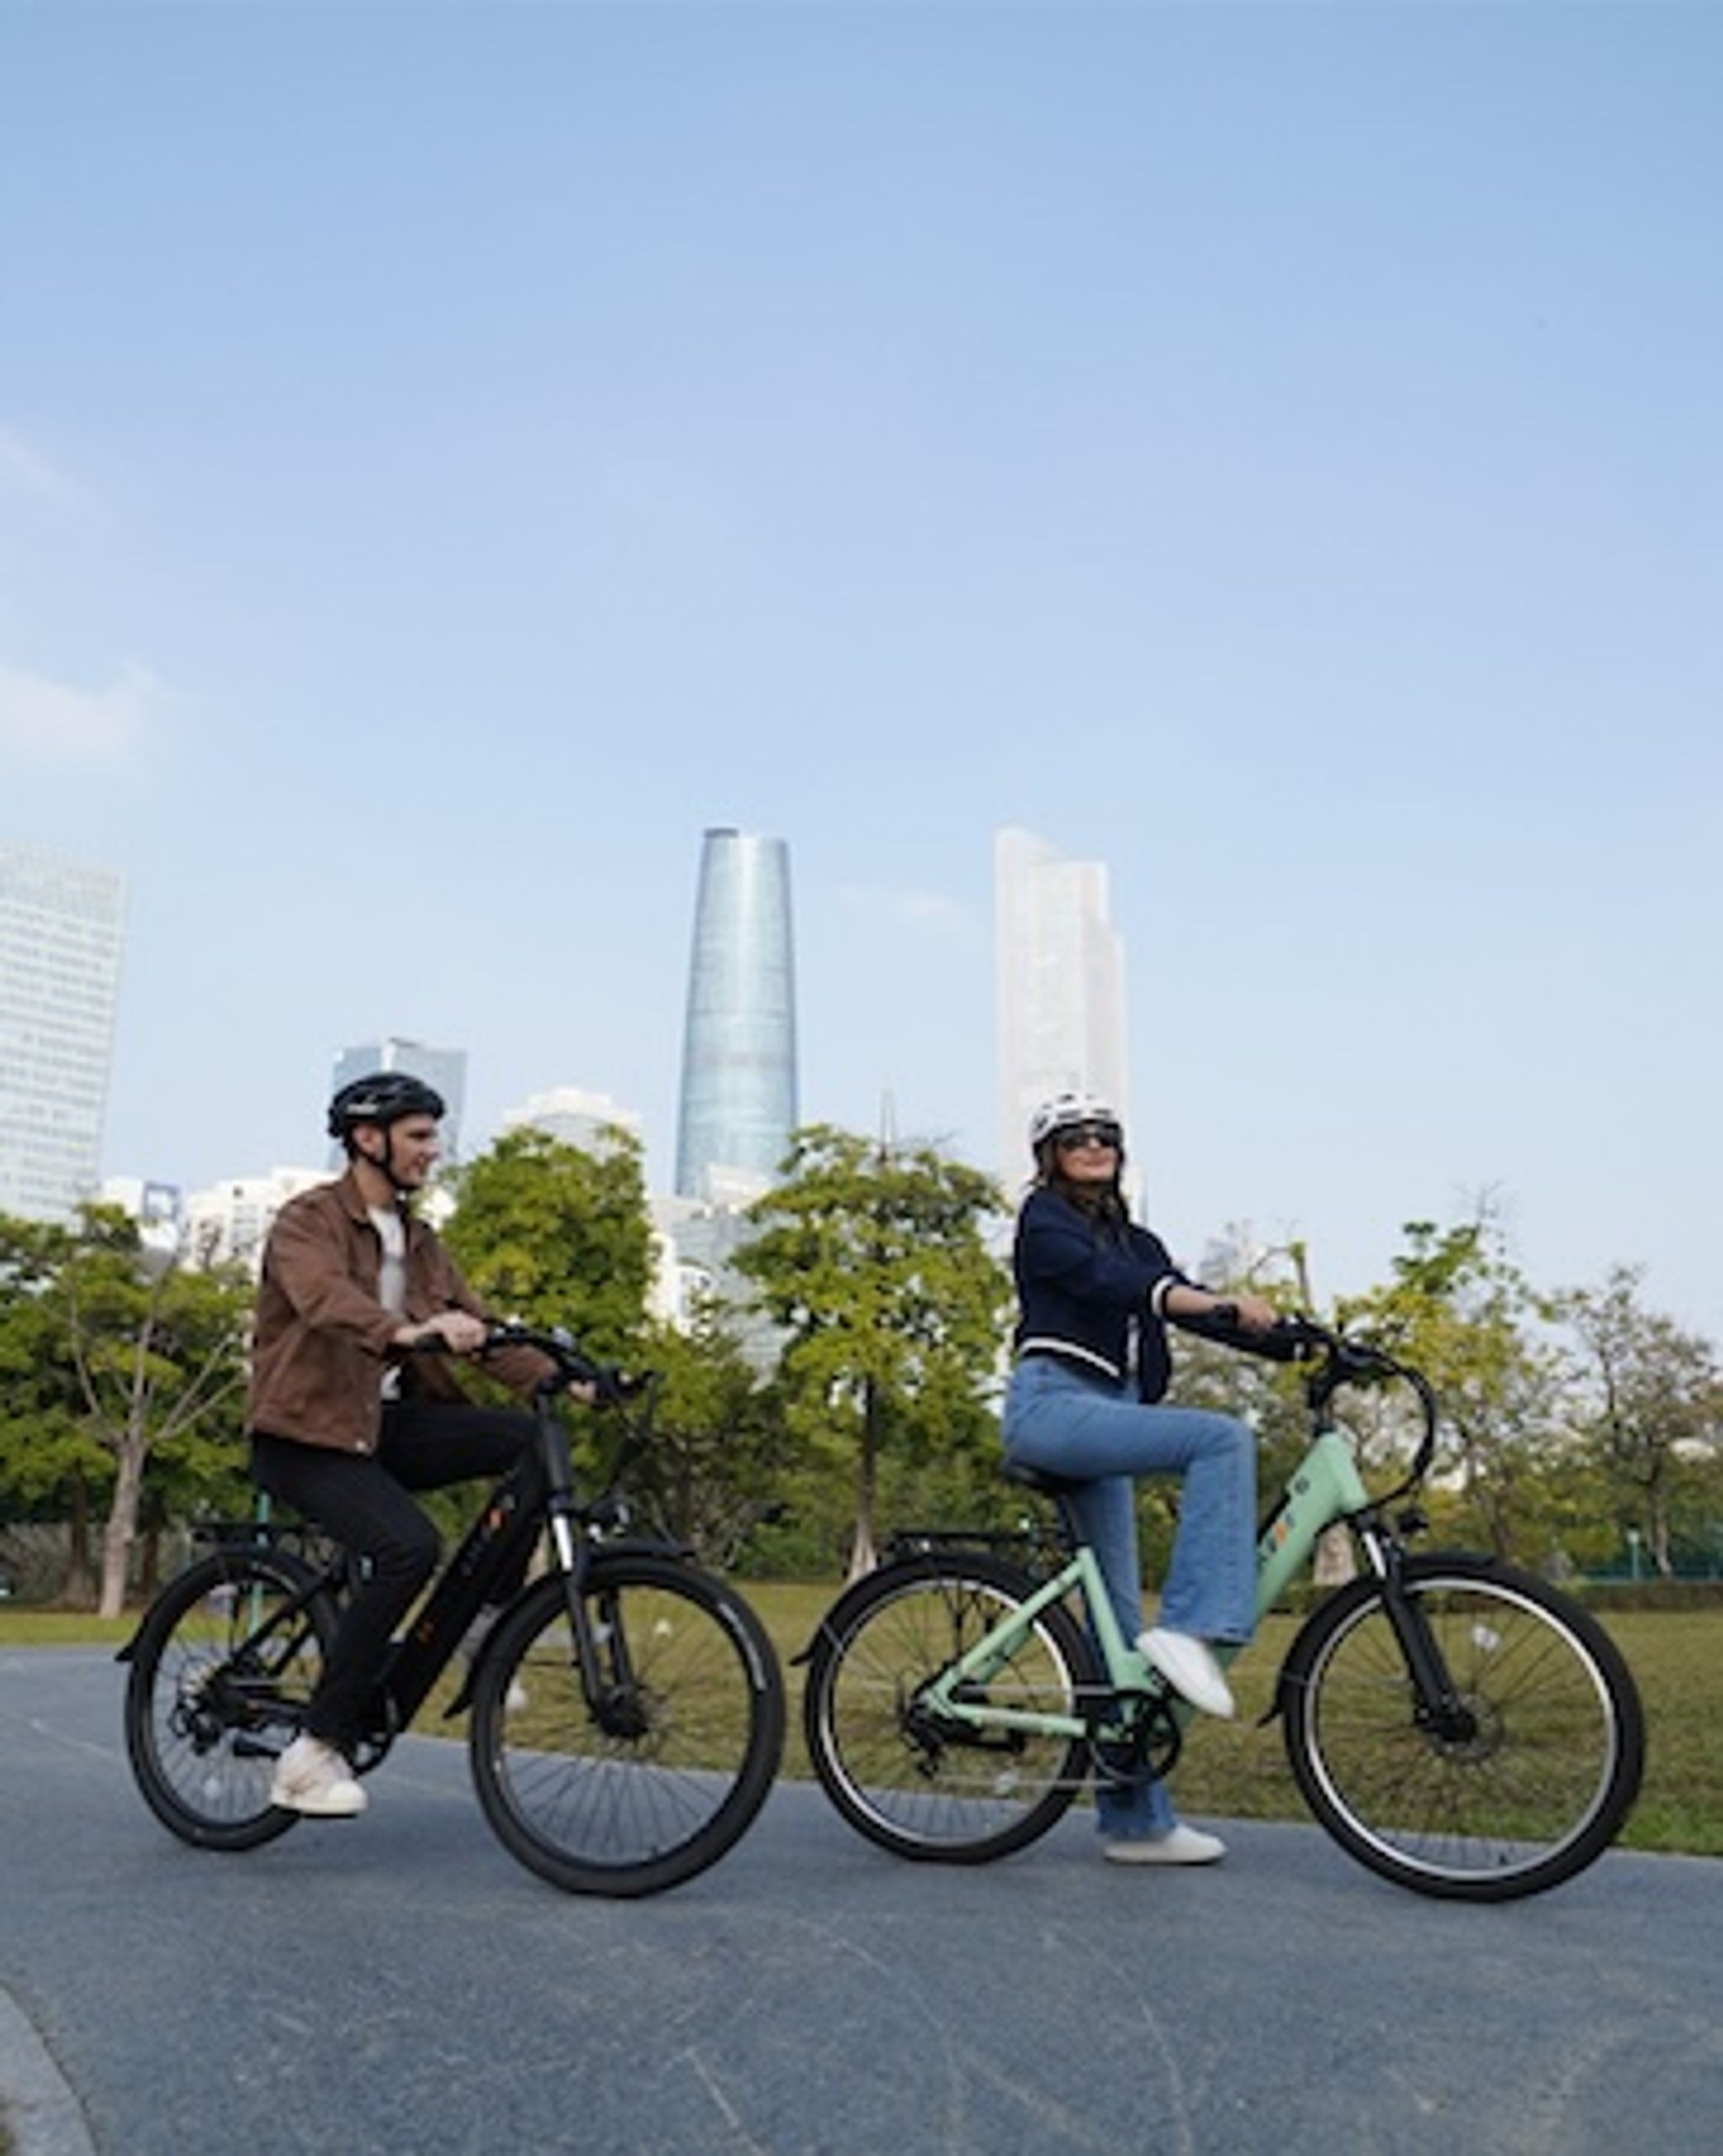 a man and a woman riding Movcan V80 e-bikes for commuting on a city road